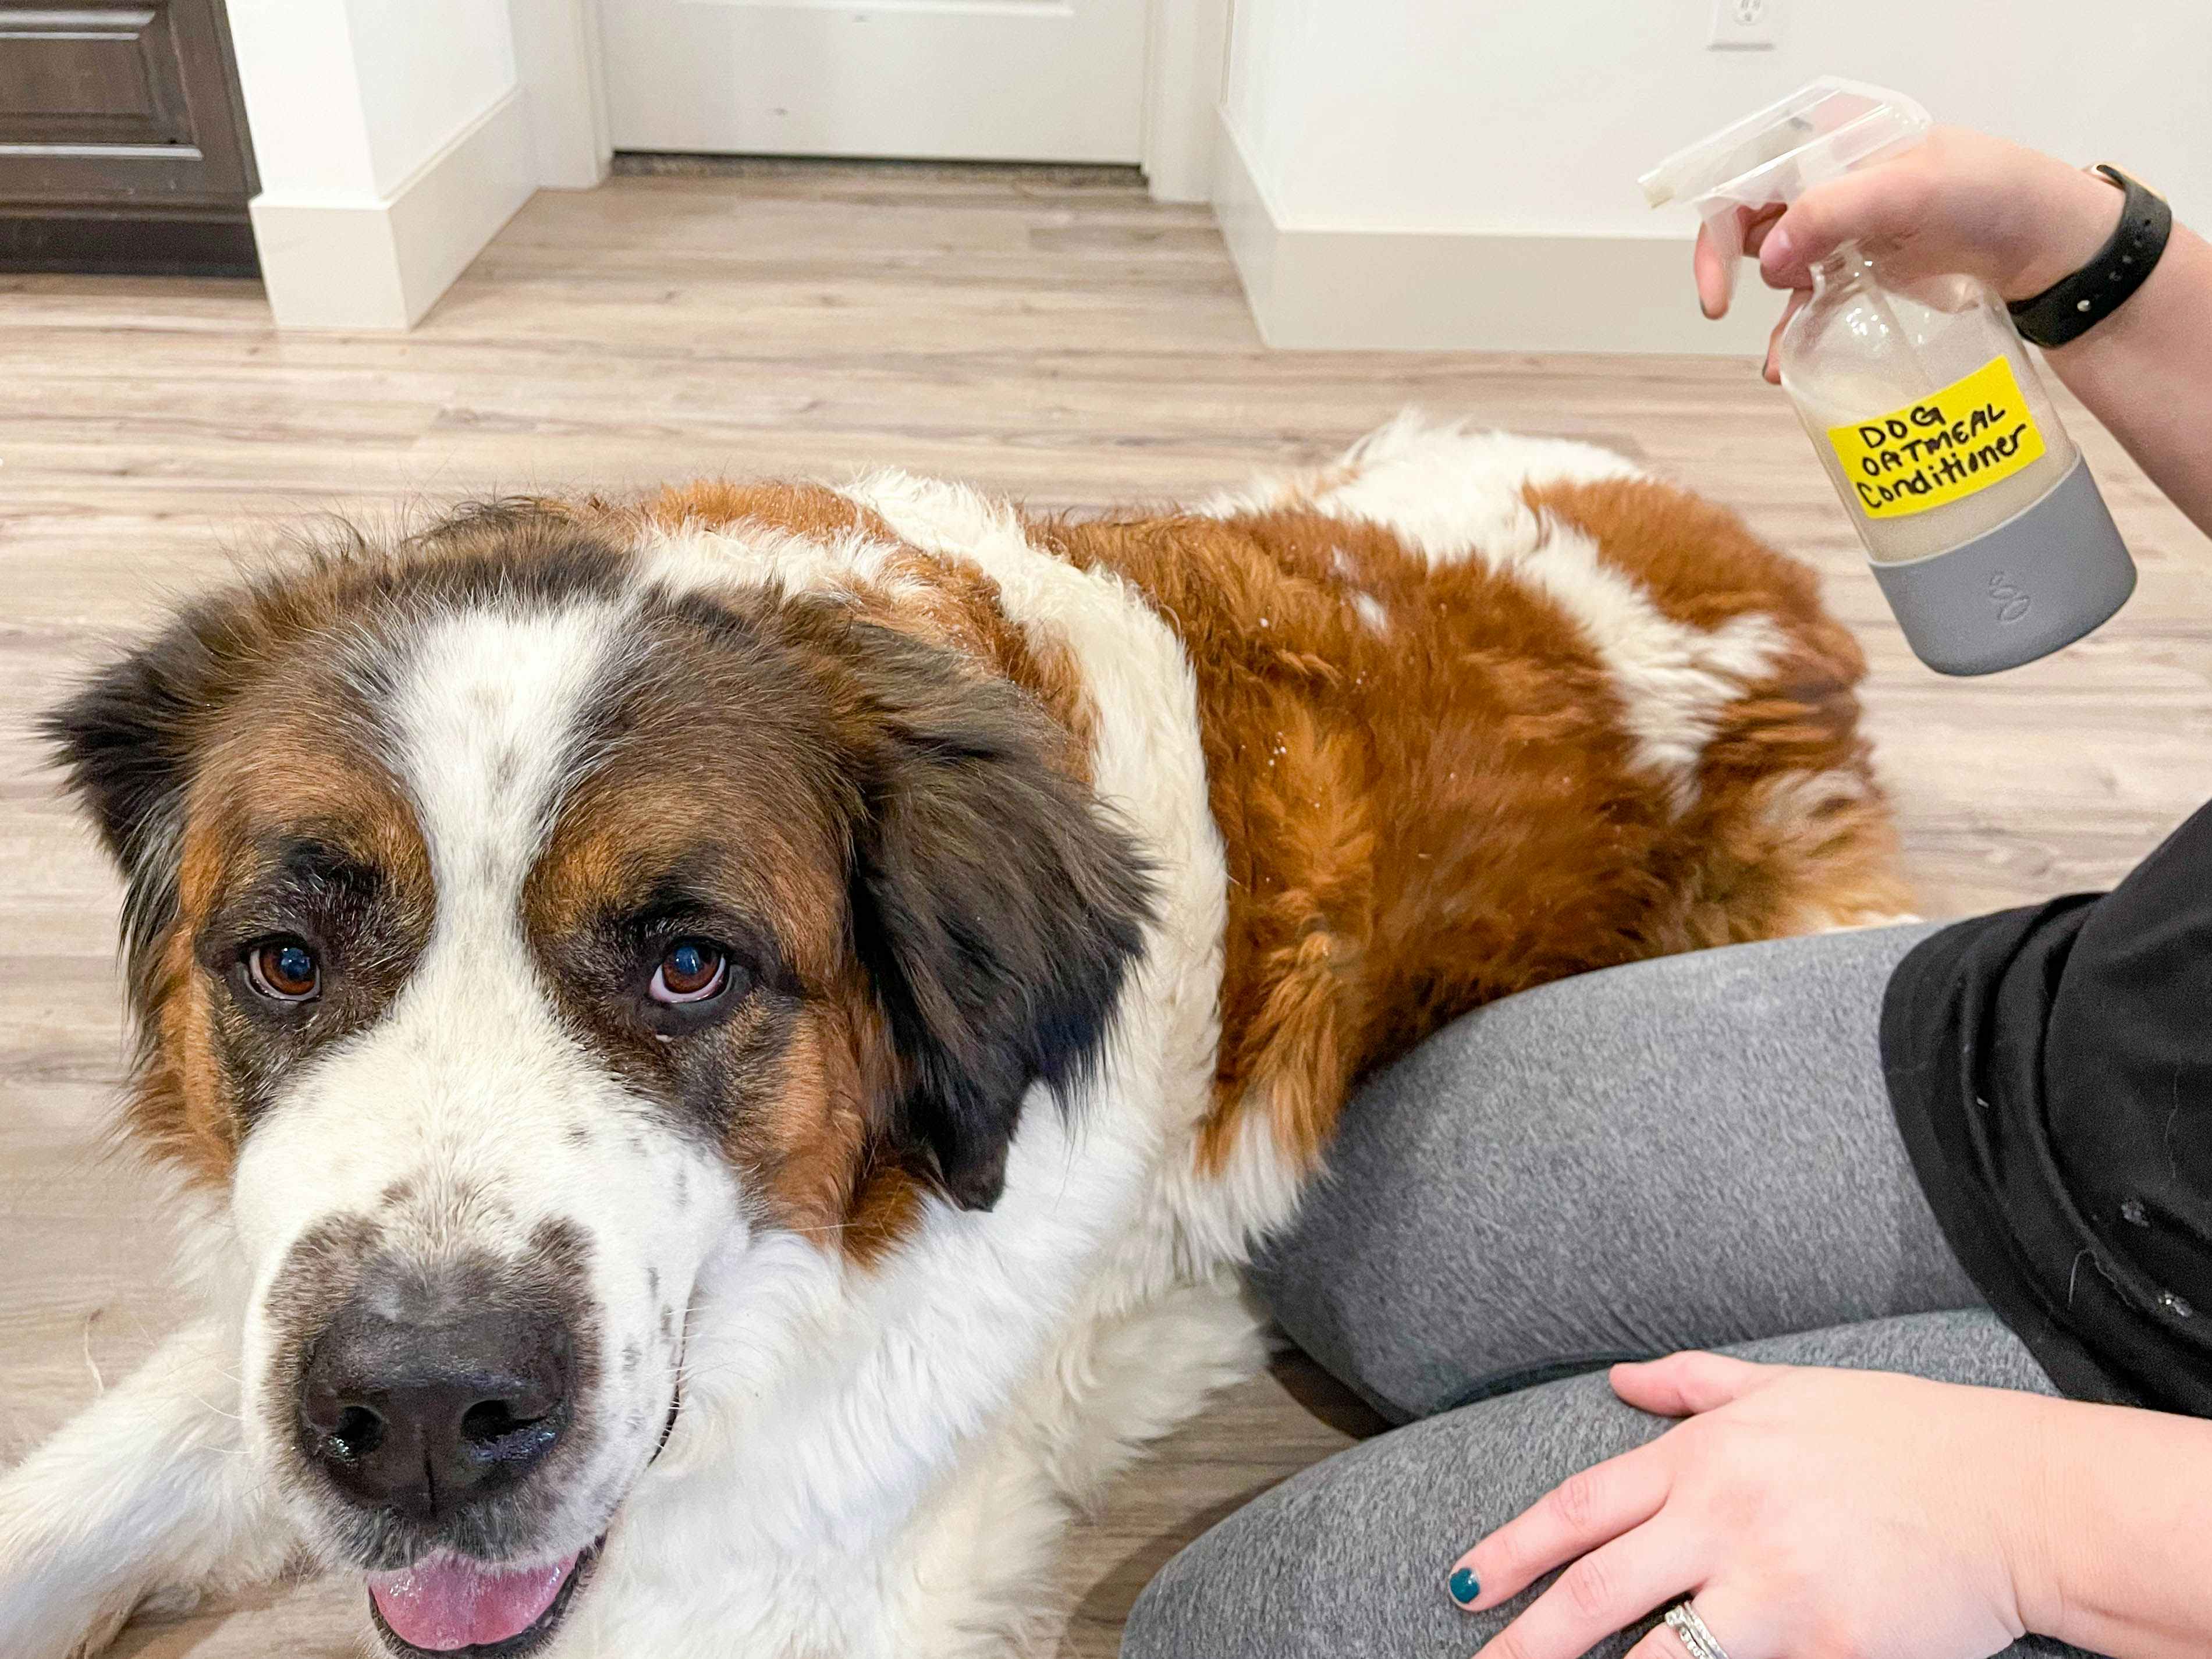 A dog laying down on the floor next to a sitting person who is using a spray bottle to apply DIY Dog Oatmeal conditioner onto its fur.